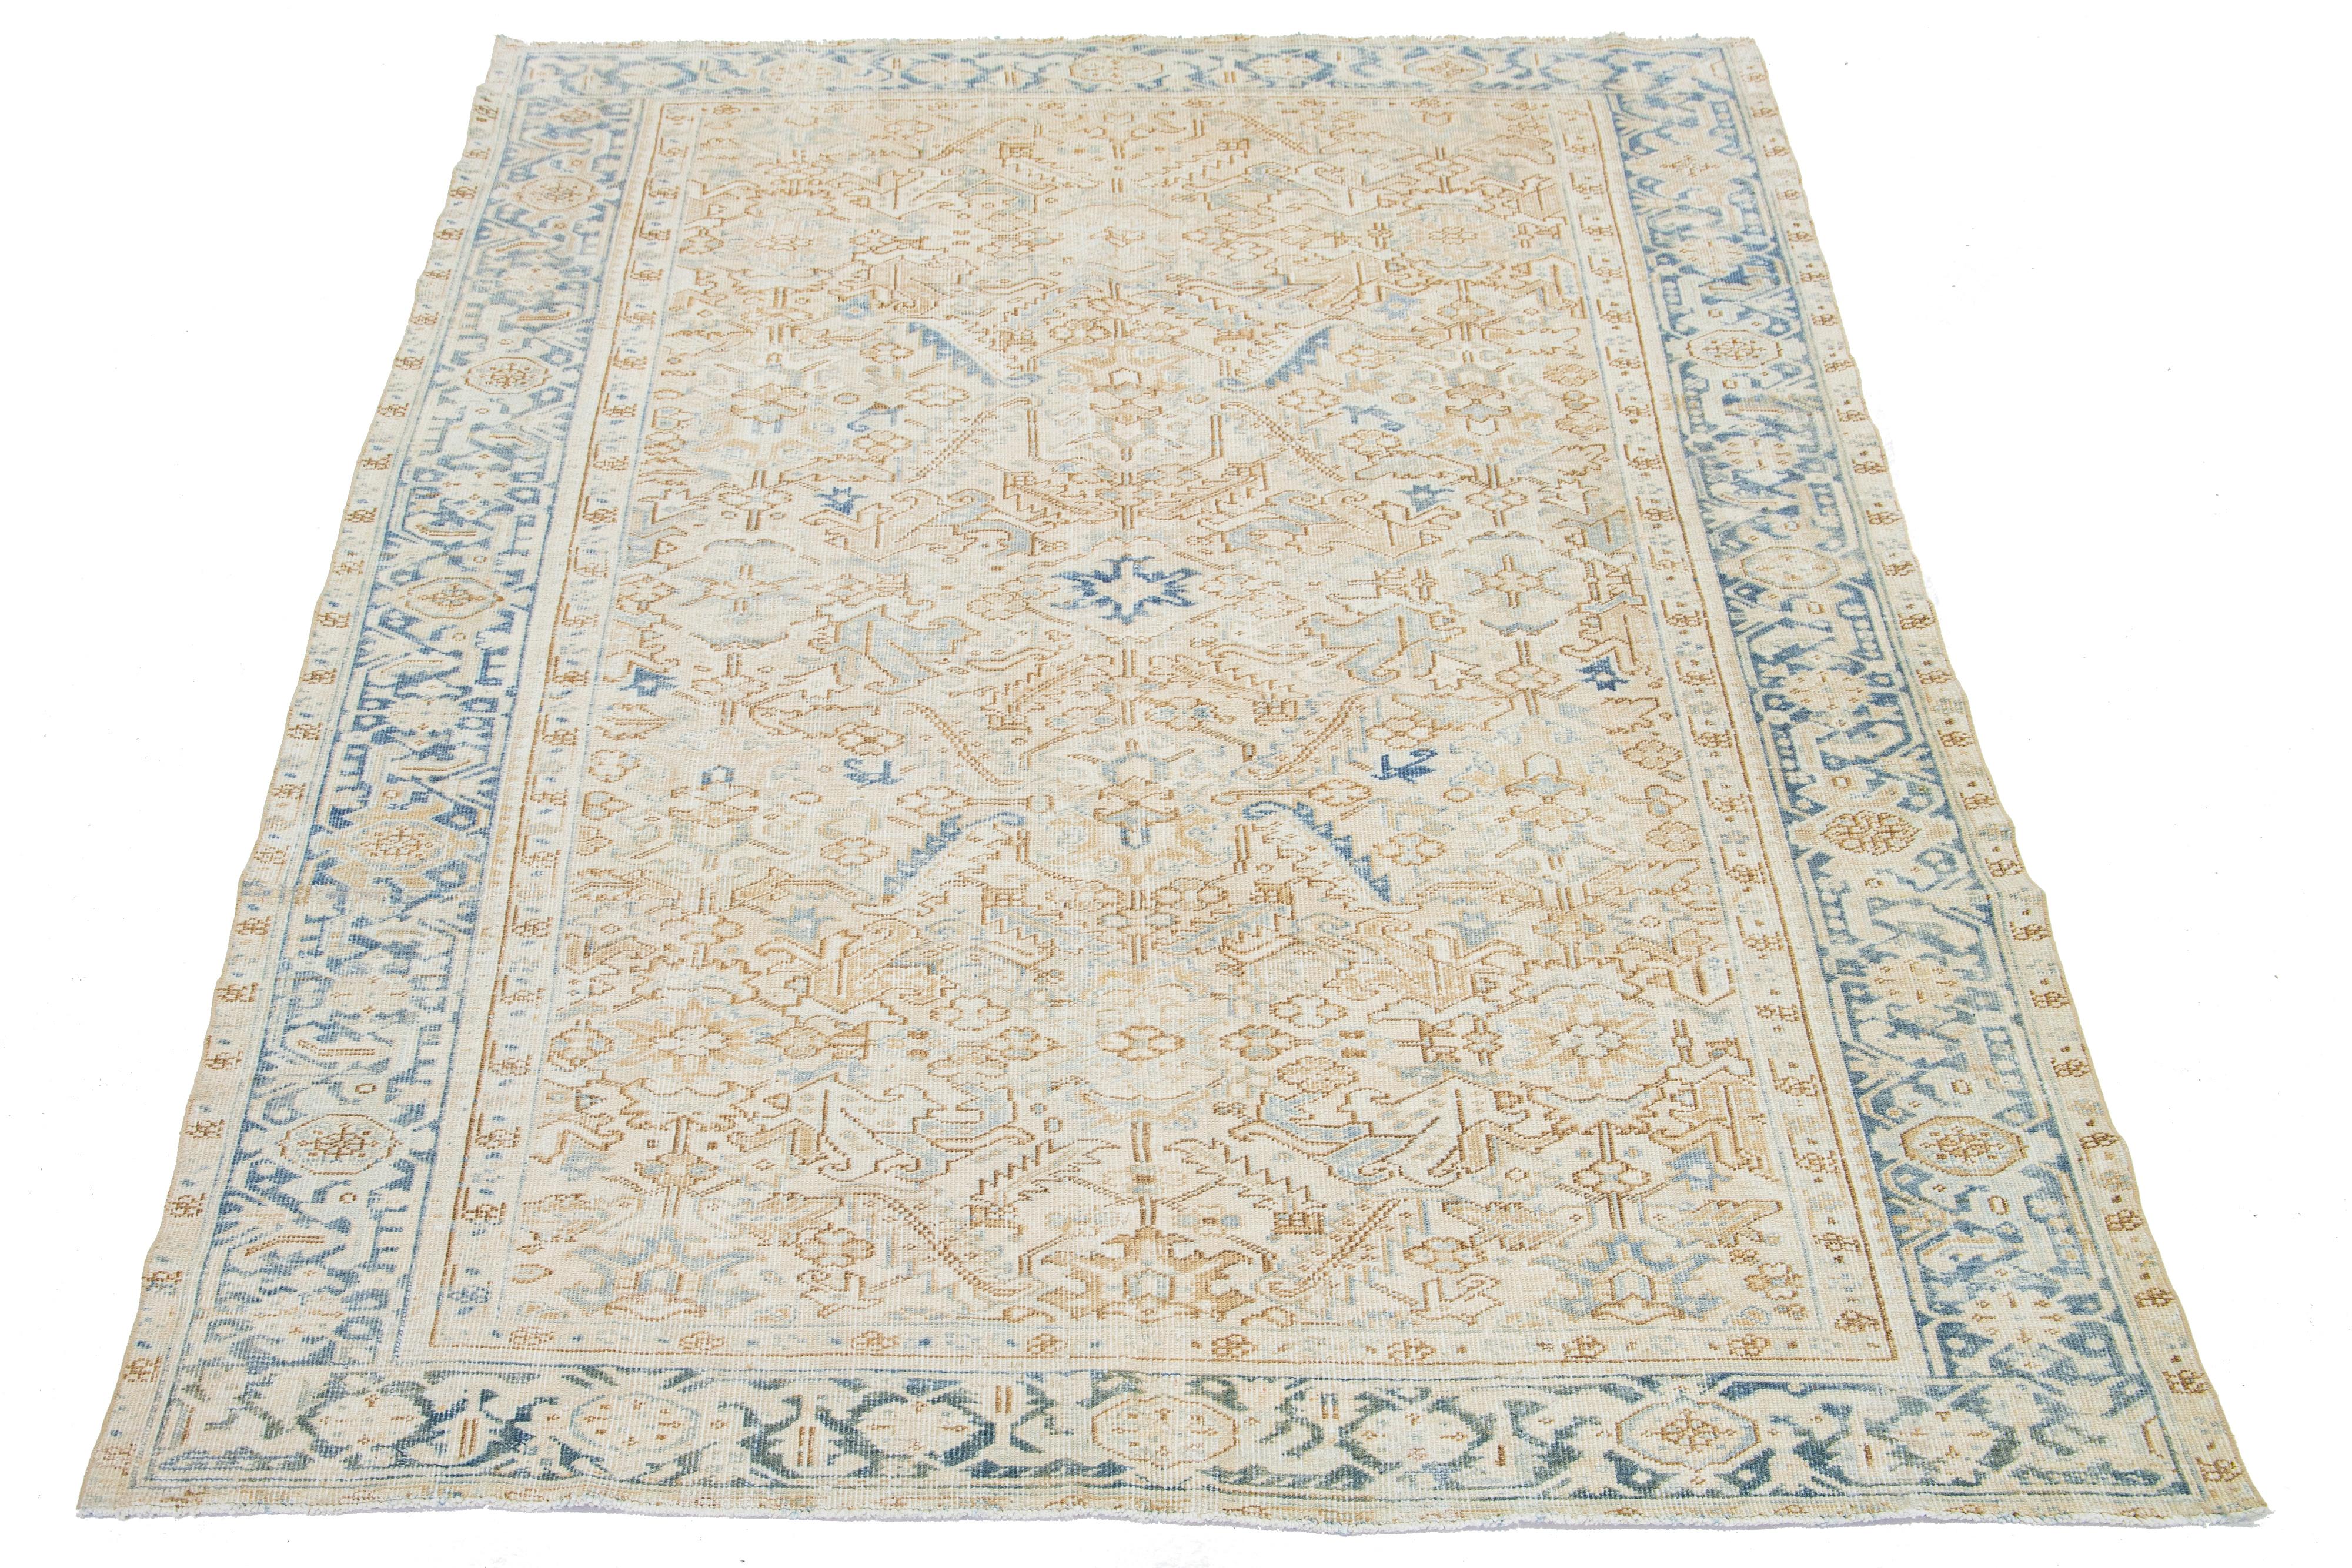 Allover Floral Antique Persian Heriz Wool Rug In Beige and Blue In Good Condition For Sale In Norwalk, CT